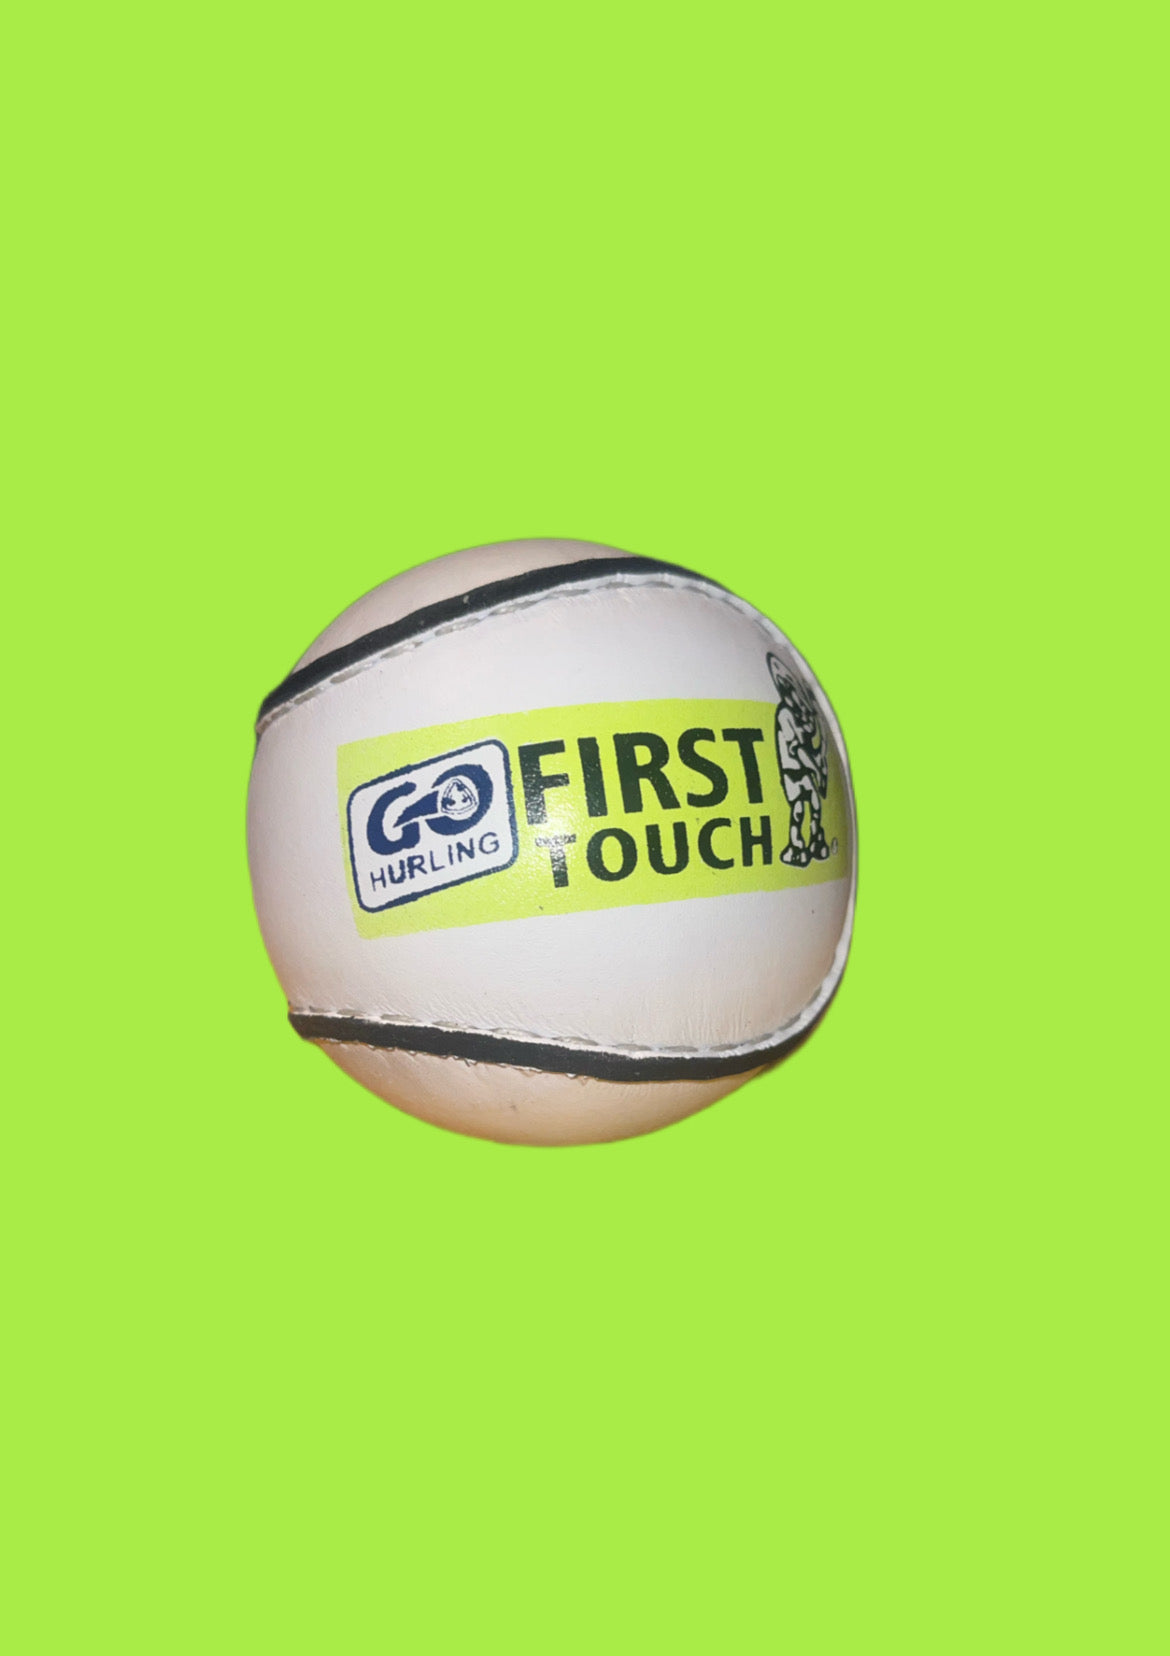 First touch sliotar 6 pack – Solo Sports